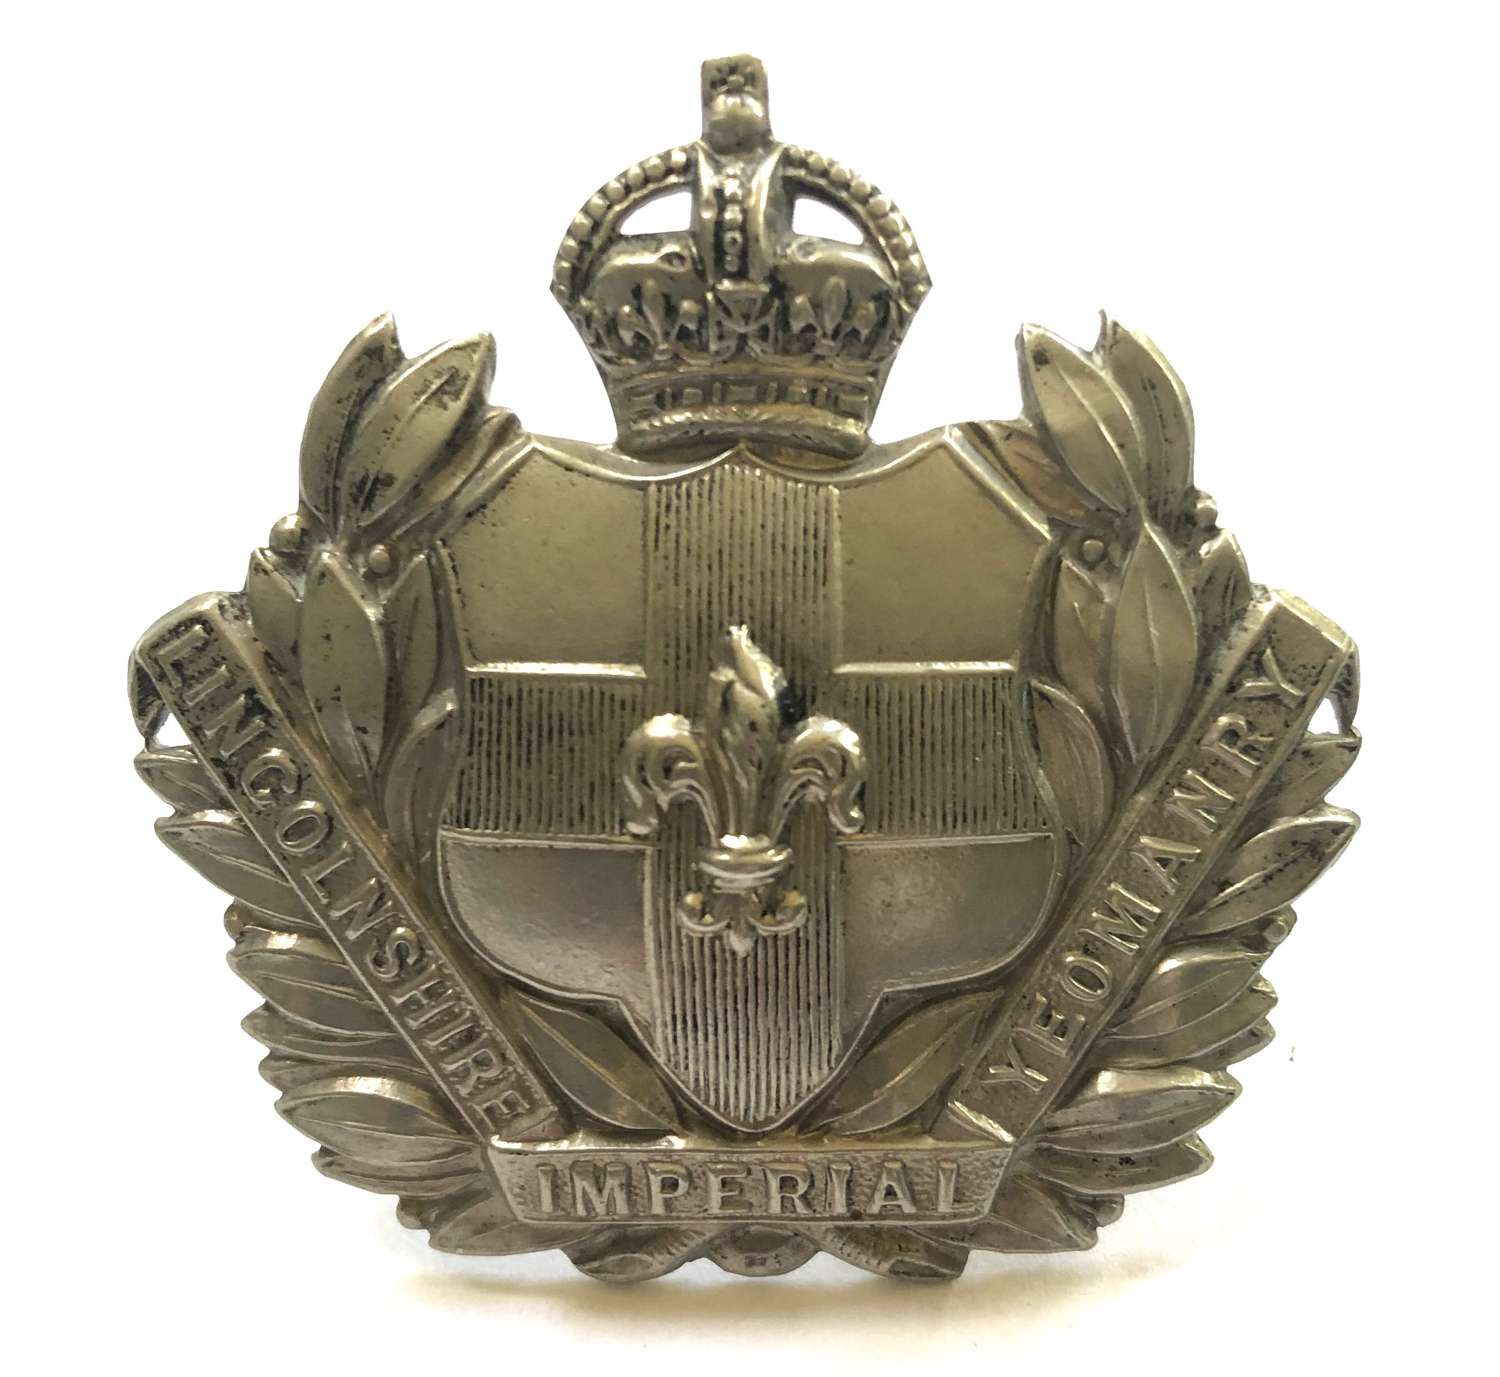 Lincolnshire Imperial Yeomanry Edwardian cap badge circa 1901-08